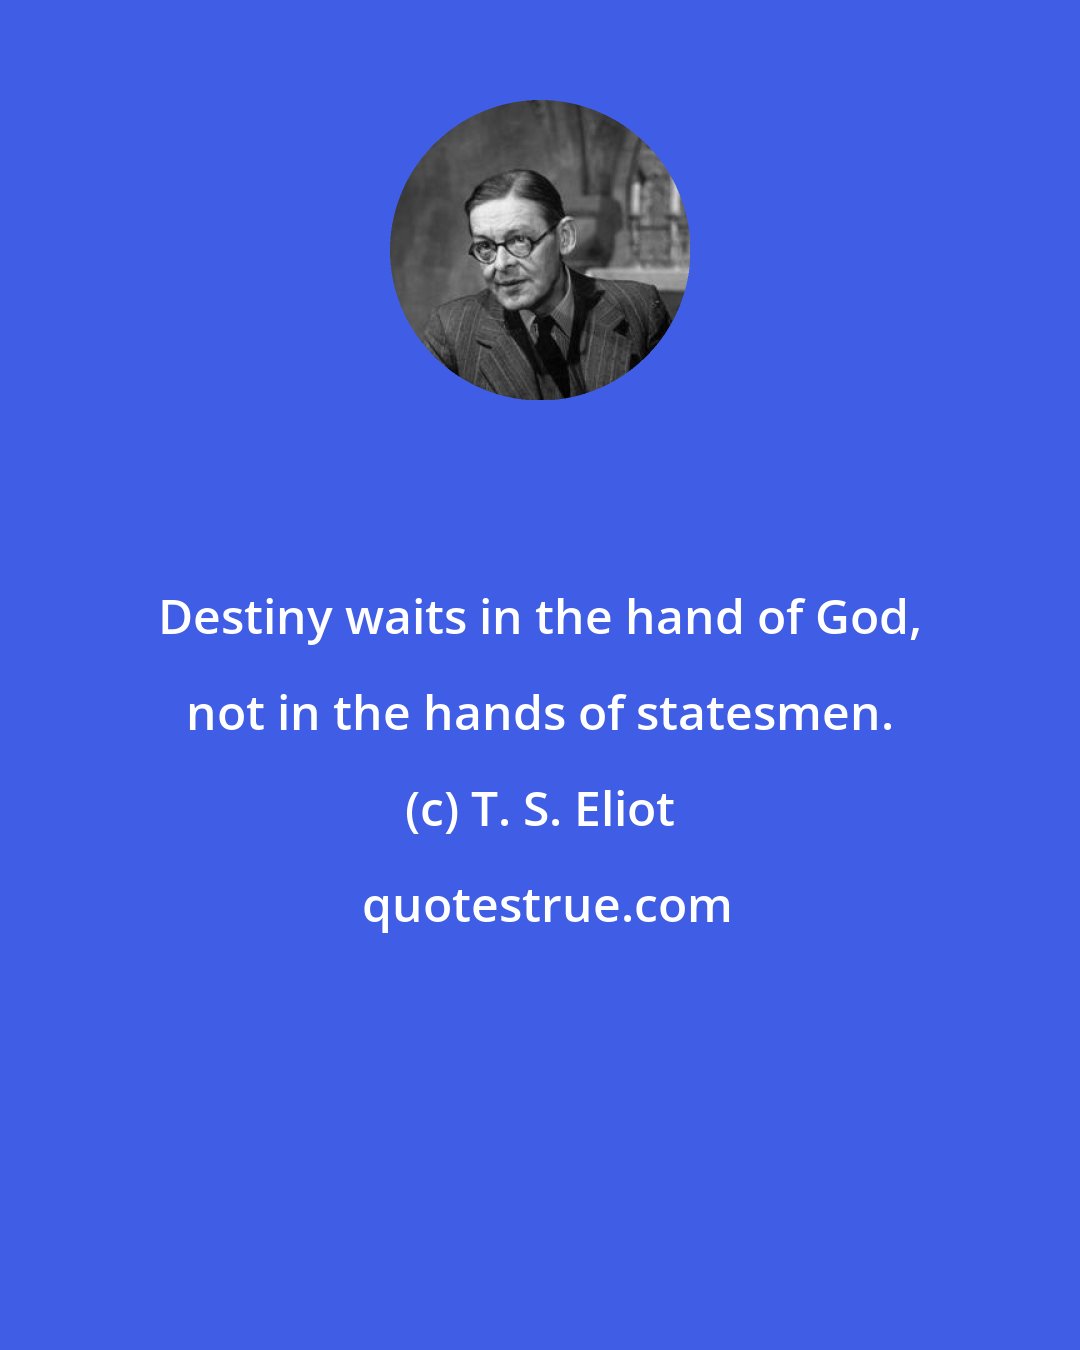 T. S. Eliot: Destiny waits in the hand of God, not in the hands of statesmen.